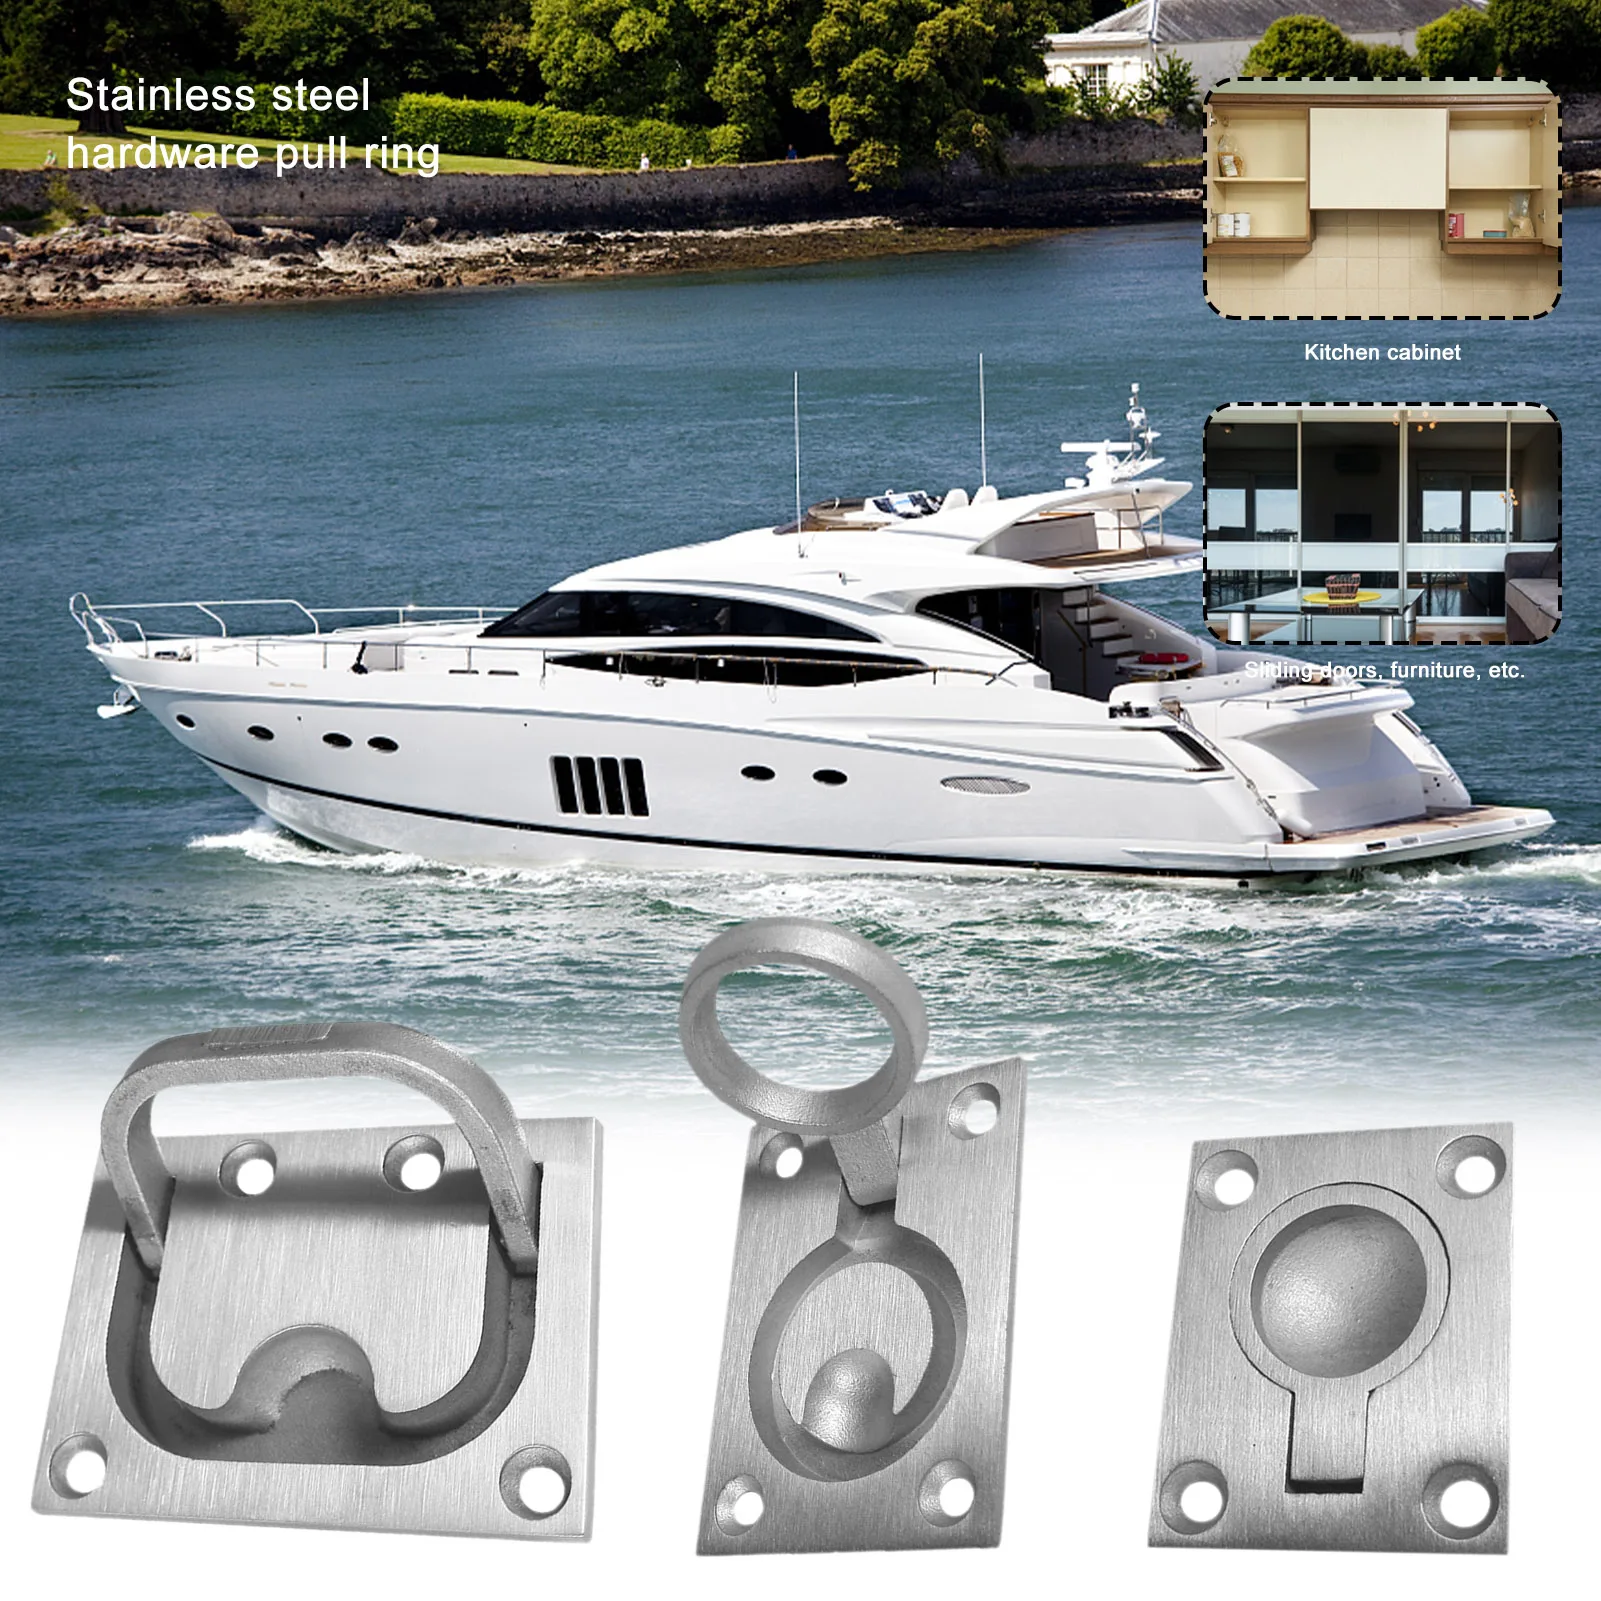 

Marine Rings Minimalist Folding Handle Stainless Steel Yacht Hardware Pull Ring Marine Floor Buckle Deck Cover Buckle Cabin Cove